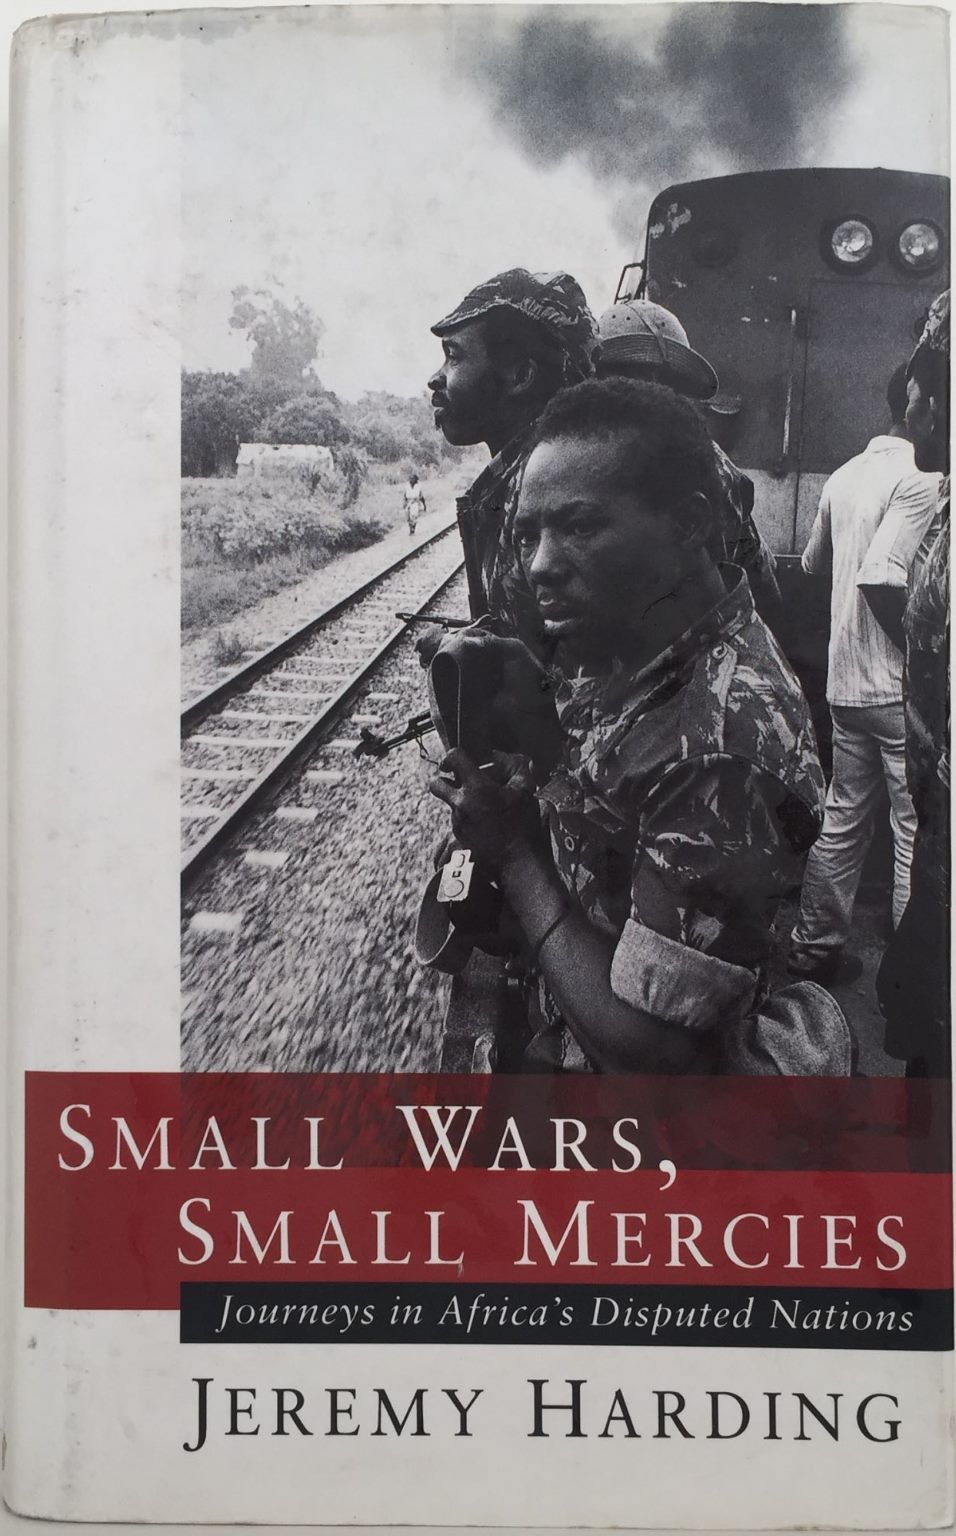 SMALL WARS, SMALL MERCIES: Journey's In Africa's Disputed Nations